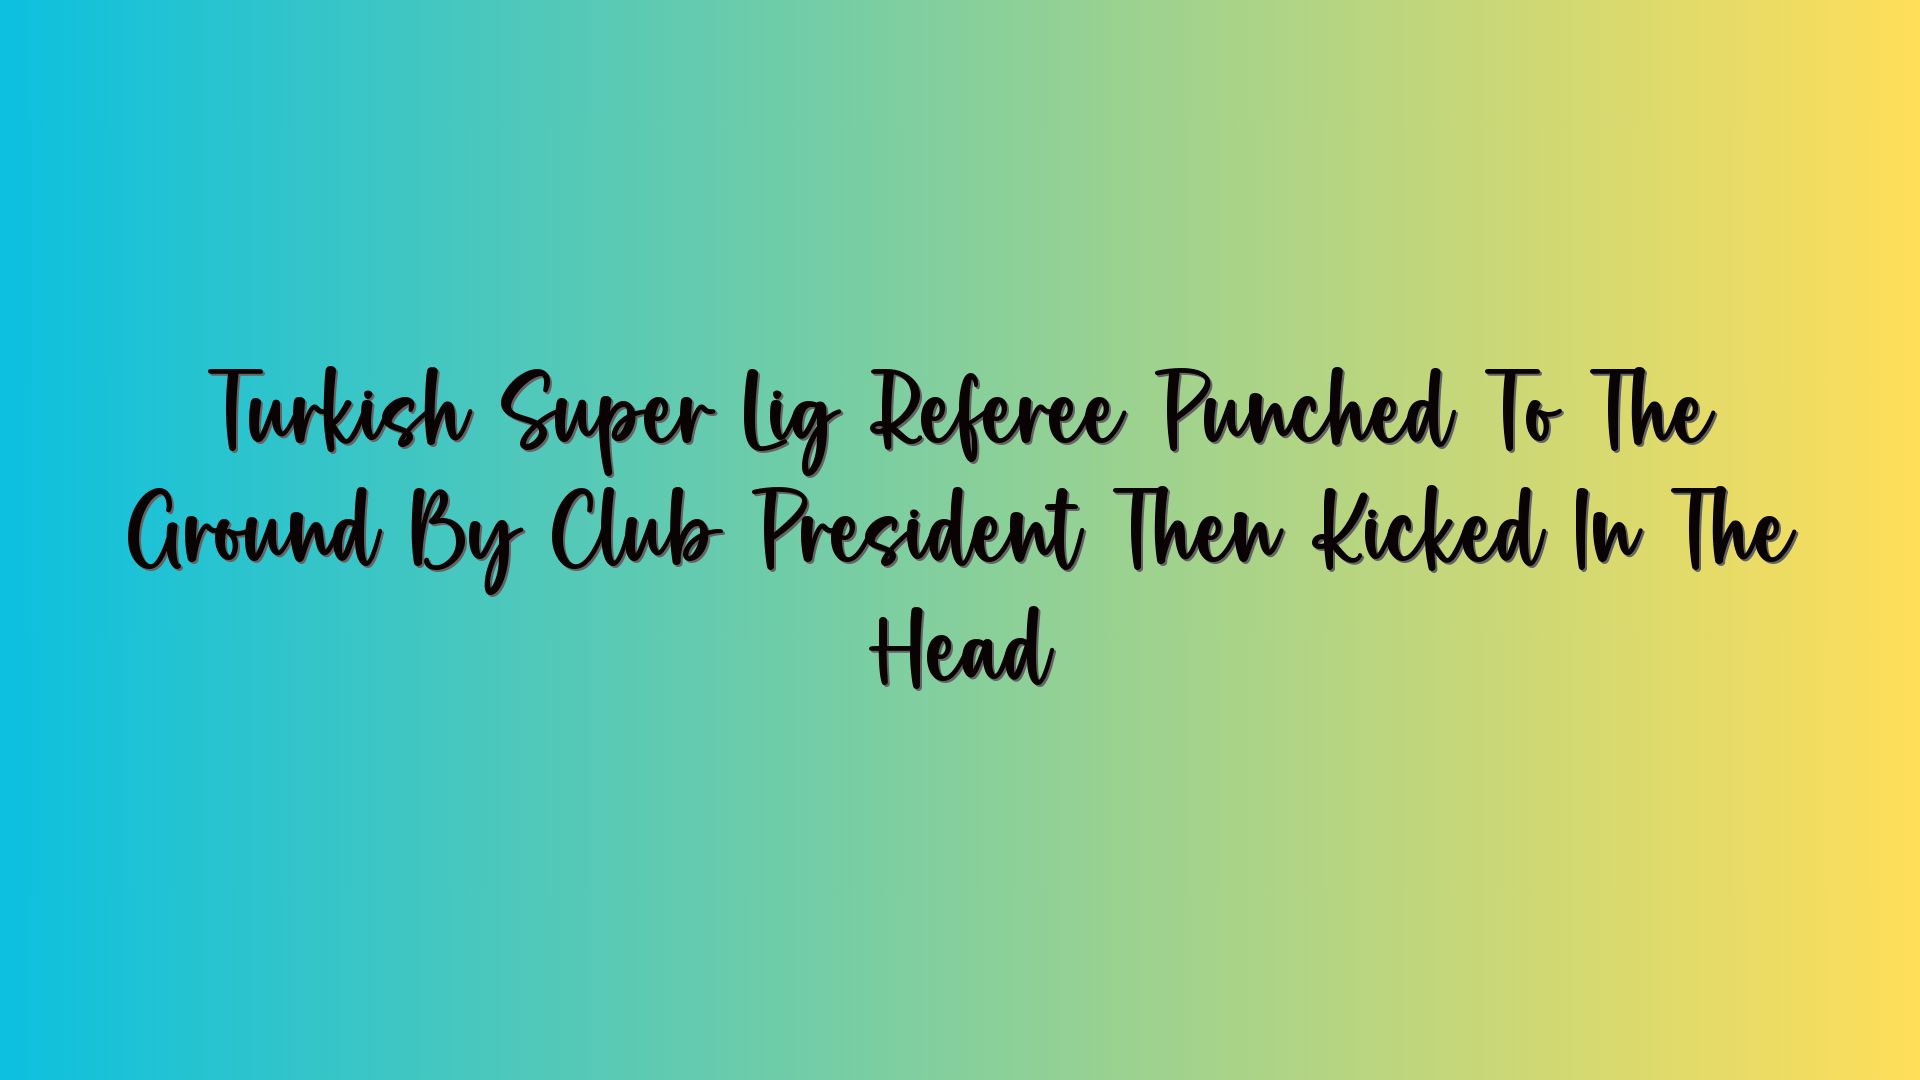 Turkish Super Lig Referee Punched To The Ground By Club President Then Kicked In The Head